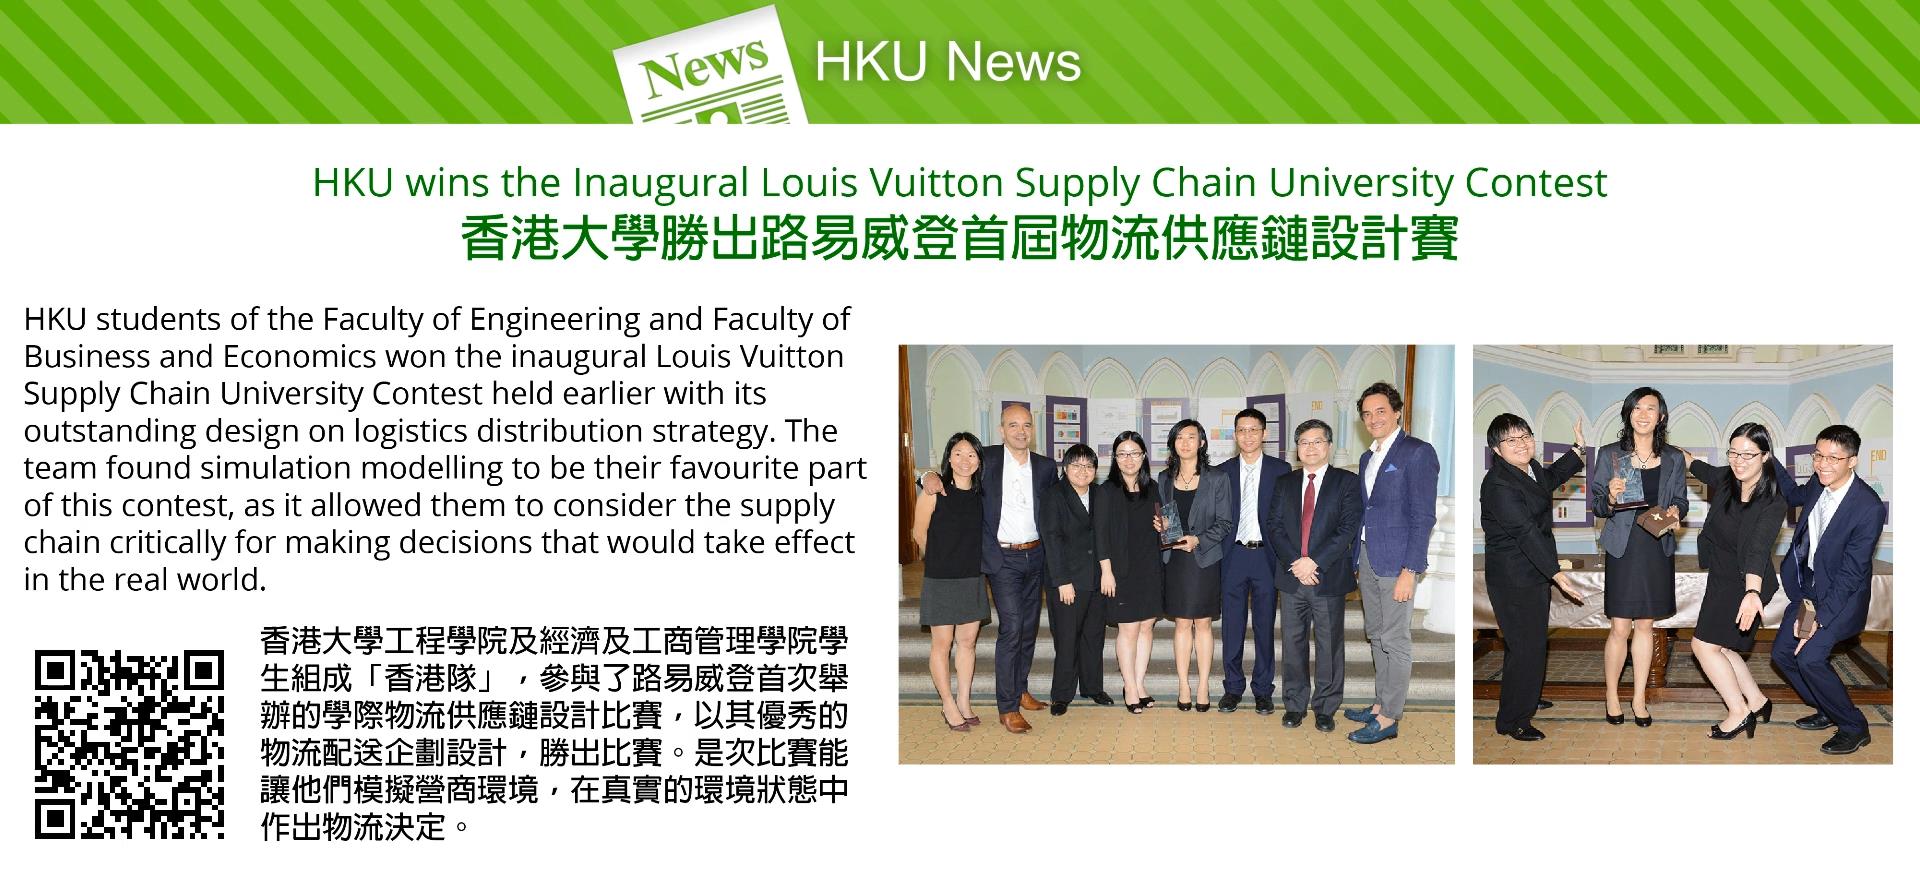 U-Vision Online  HKU wins the Inaugural Louis Vuitton Supply Chain  University Contest